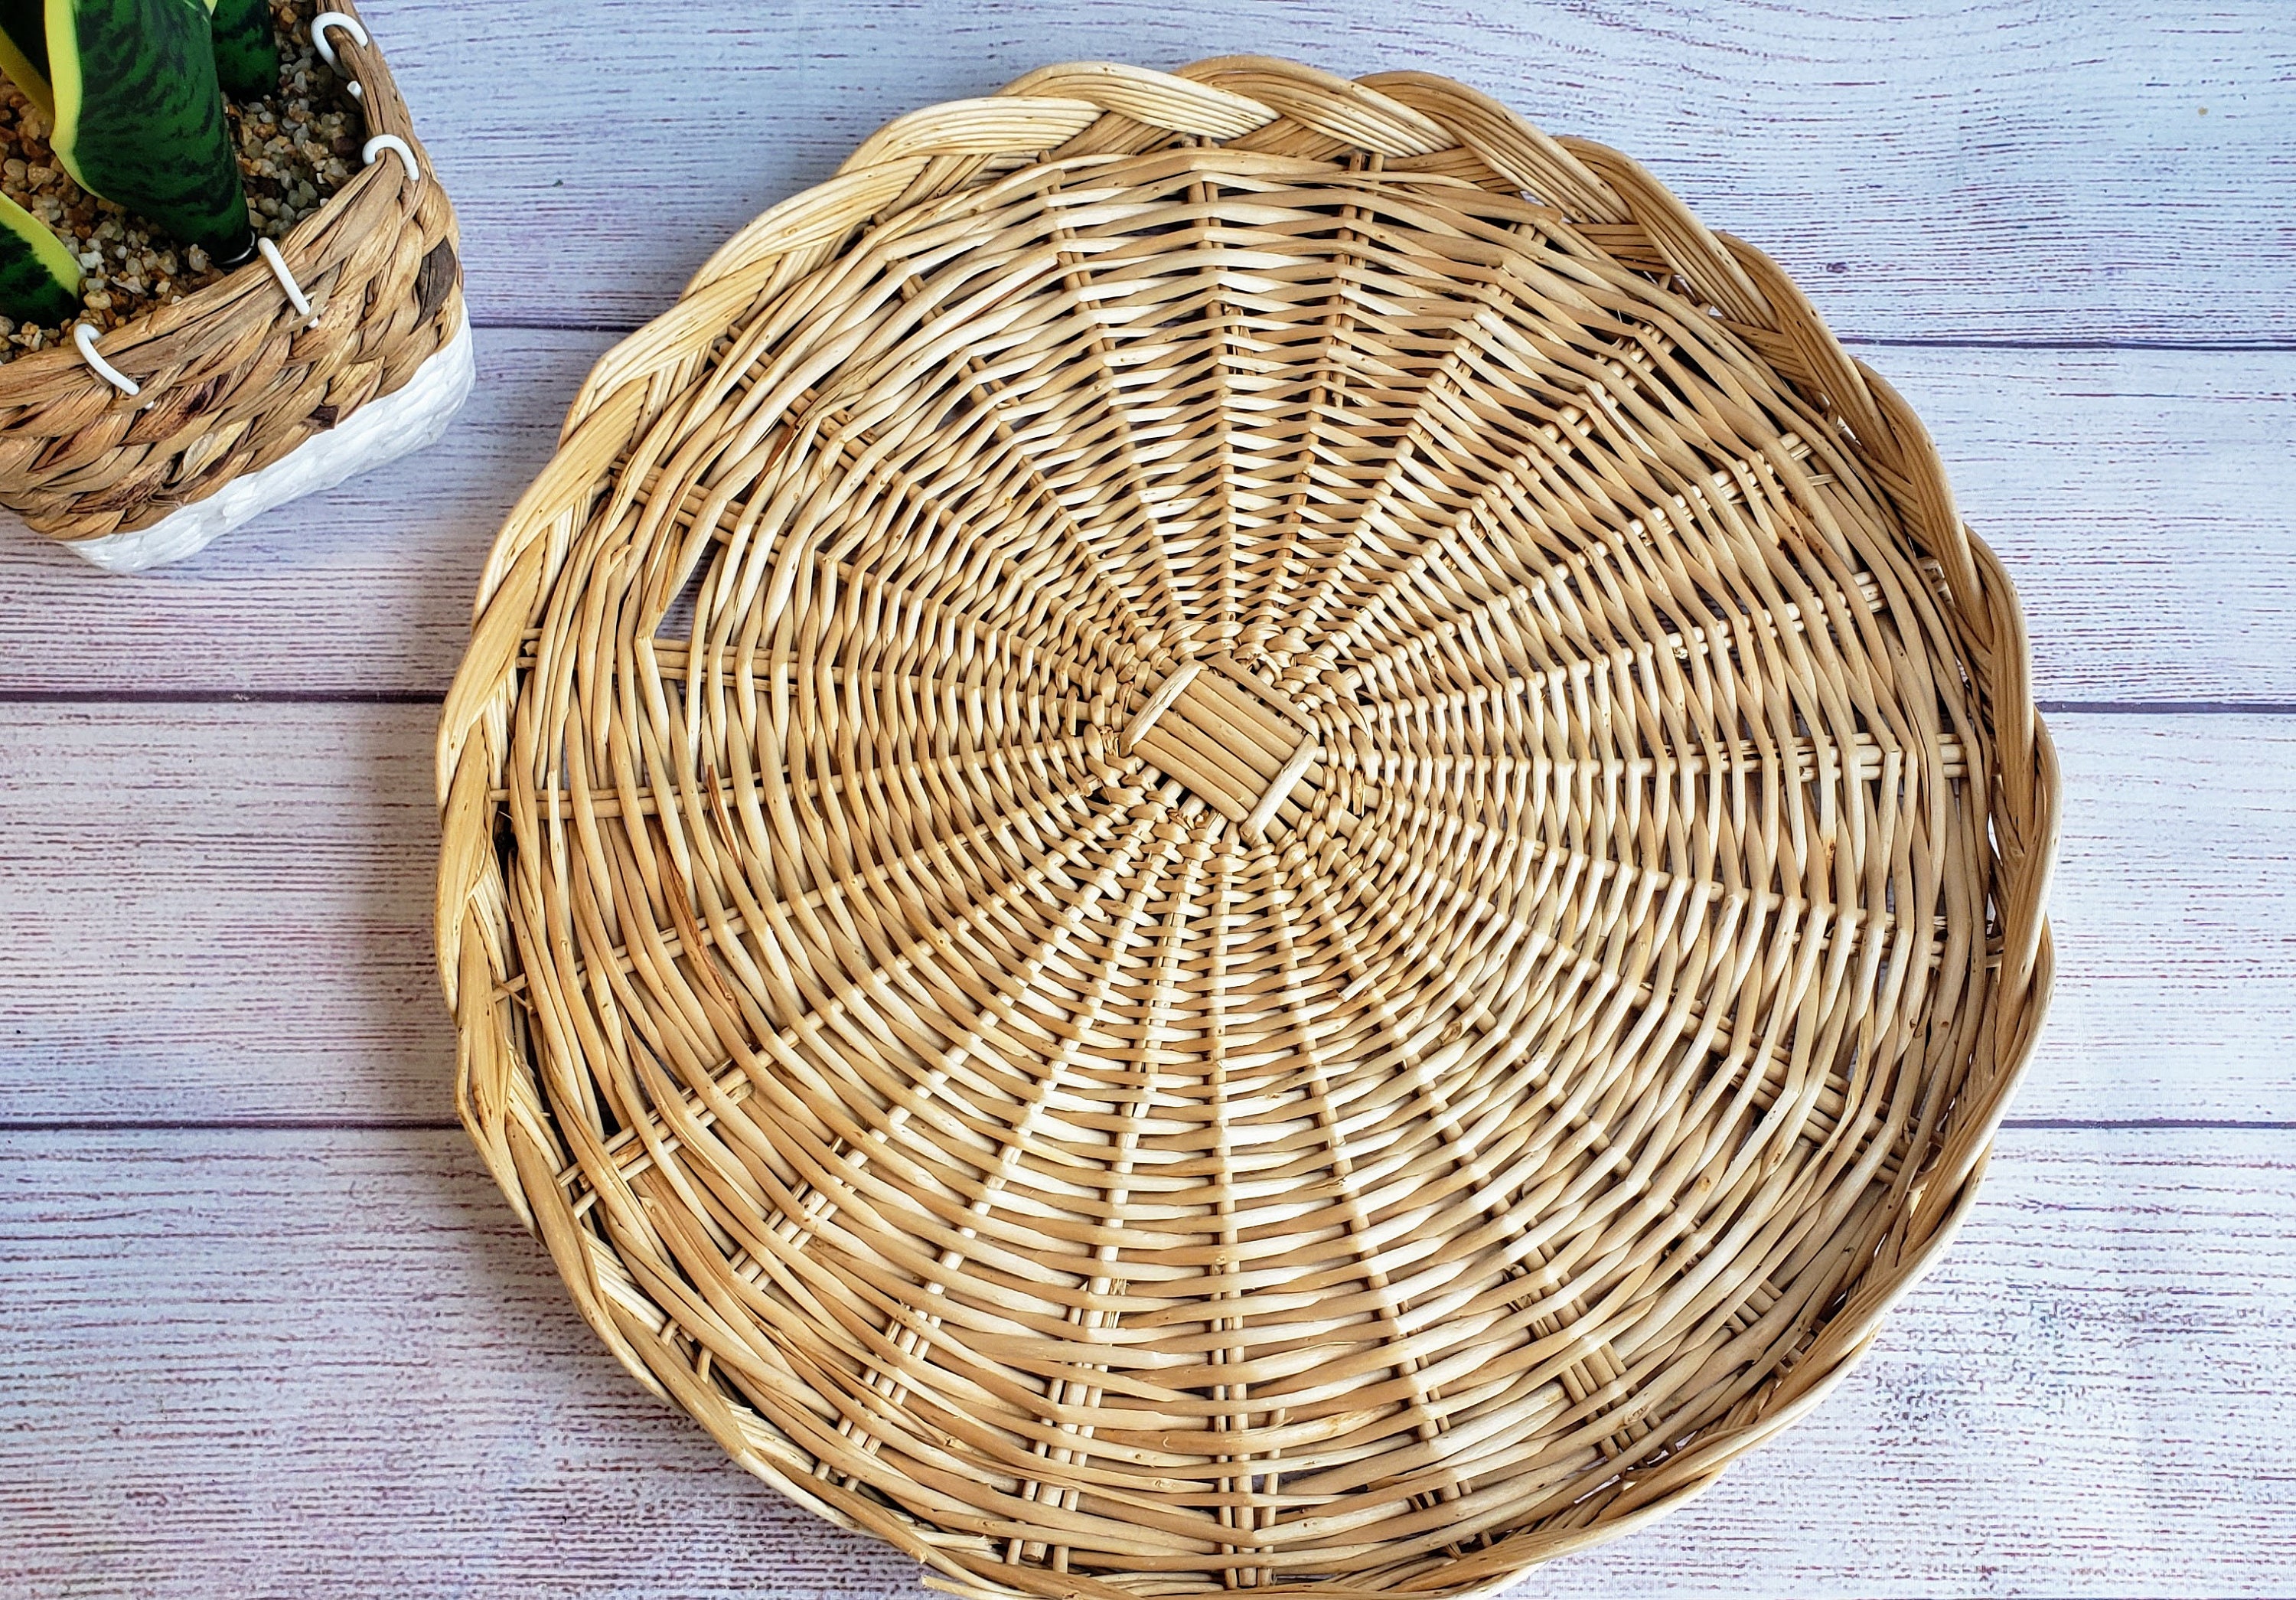 CLEANED Vintage Round Wicker Tray With Braided Border - Etsy